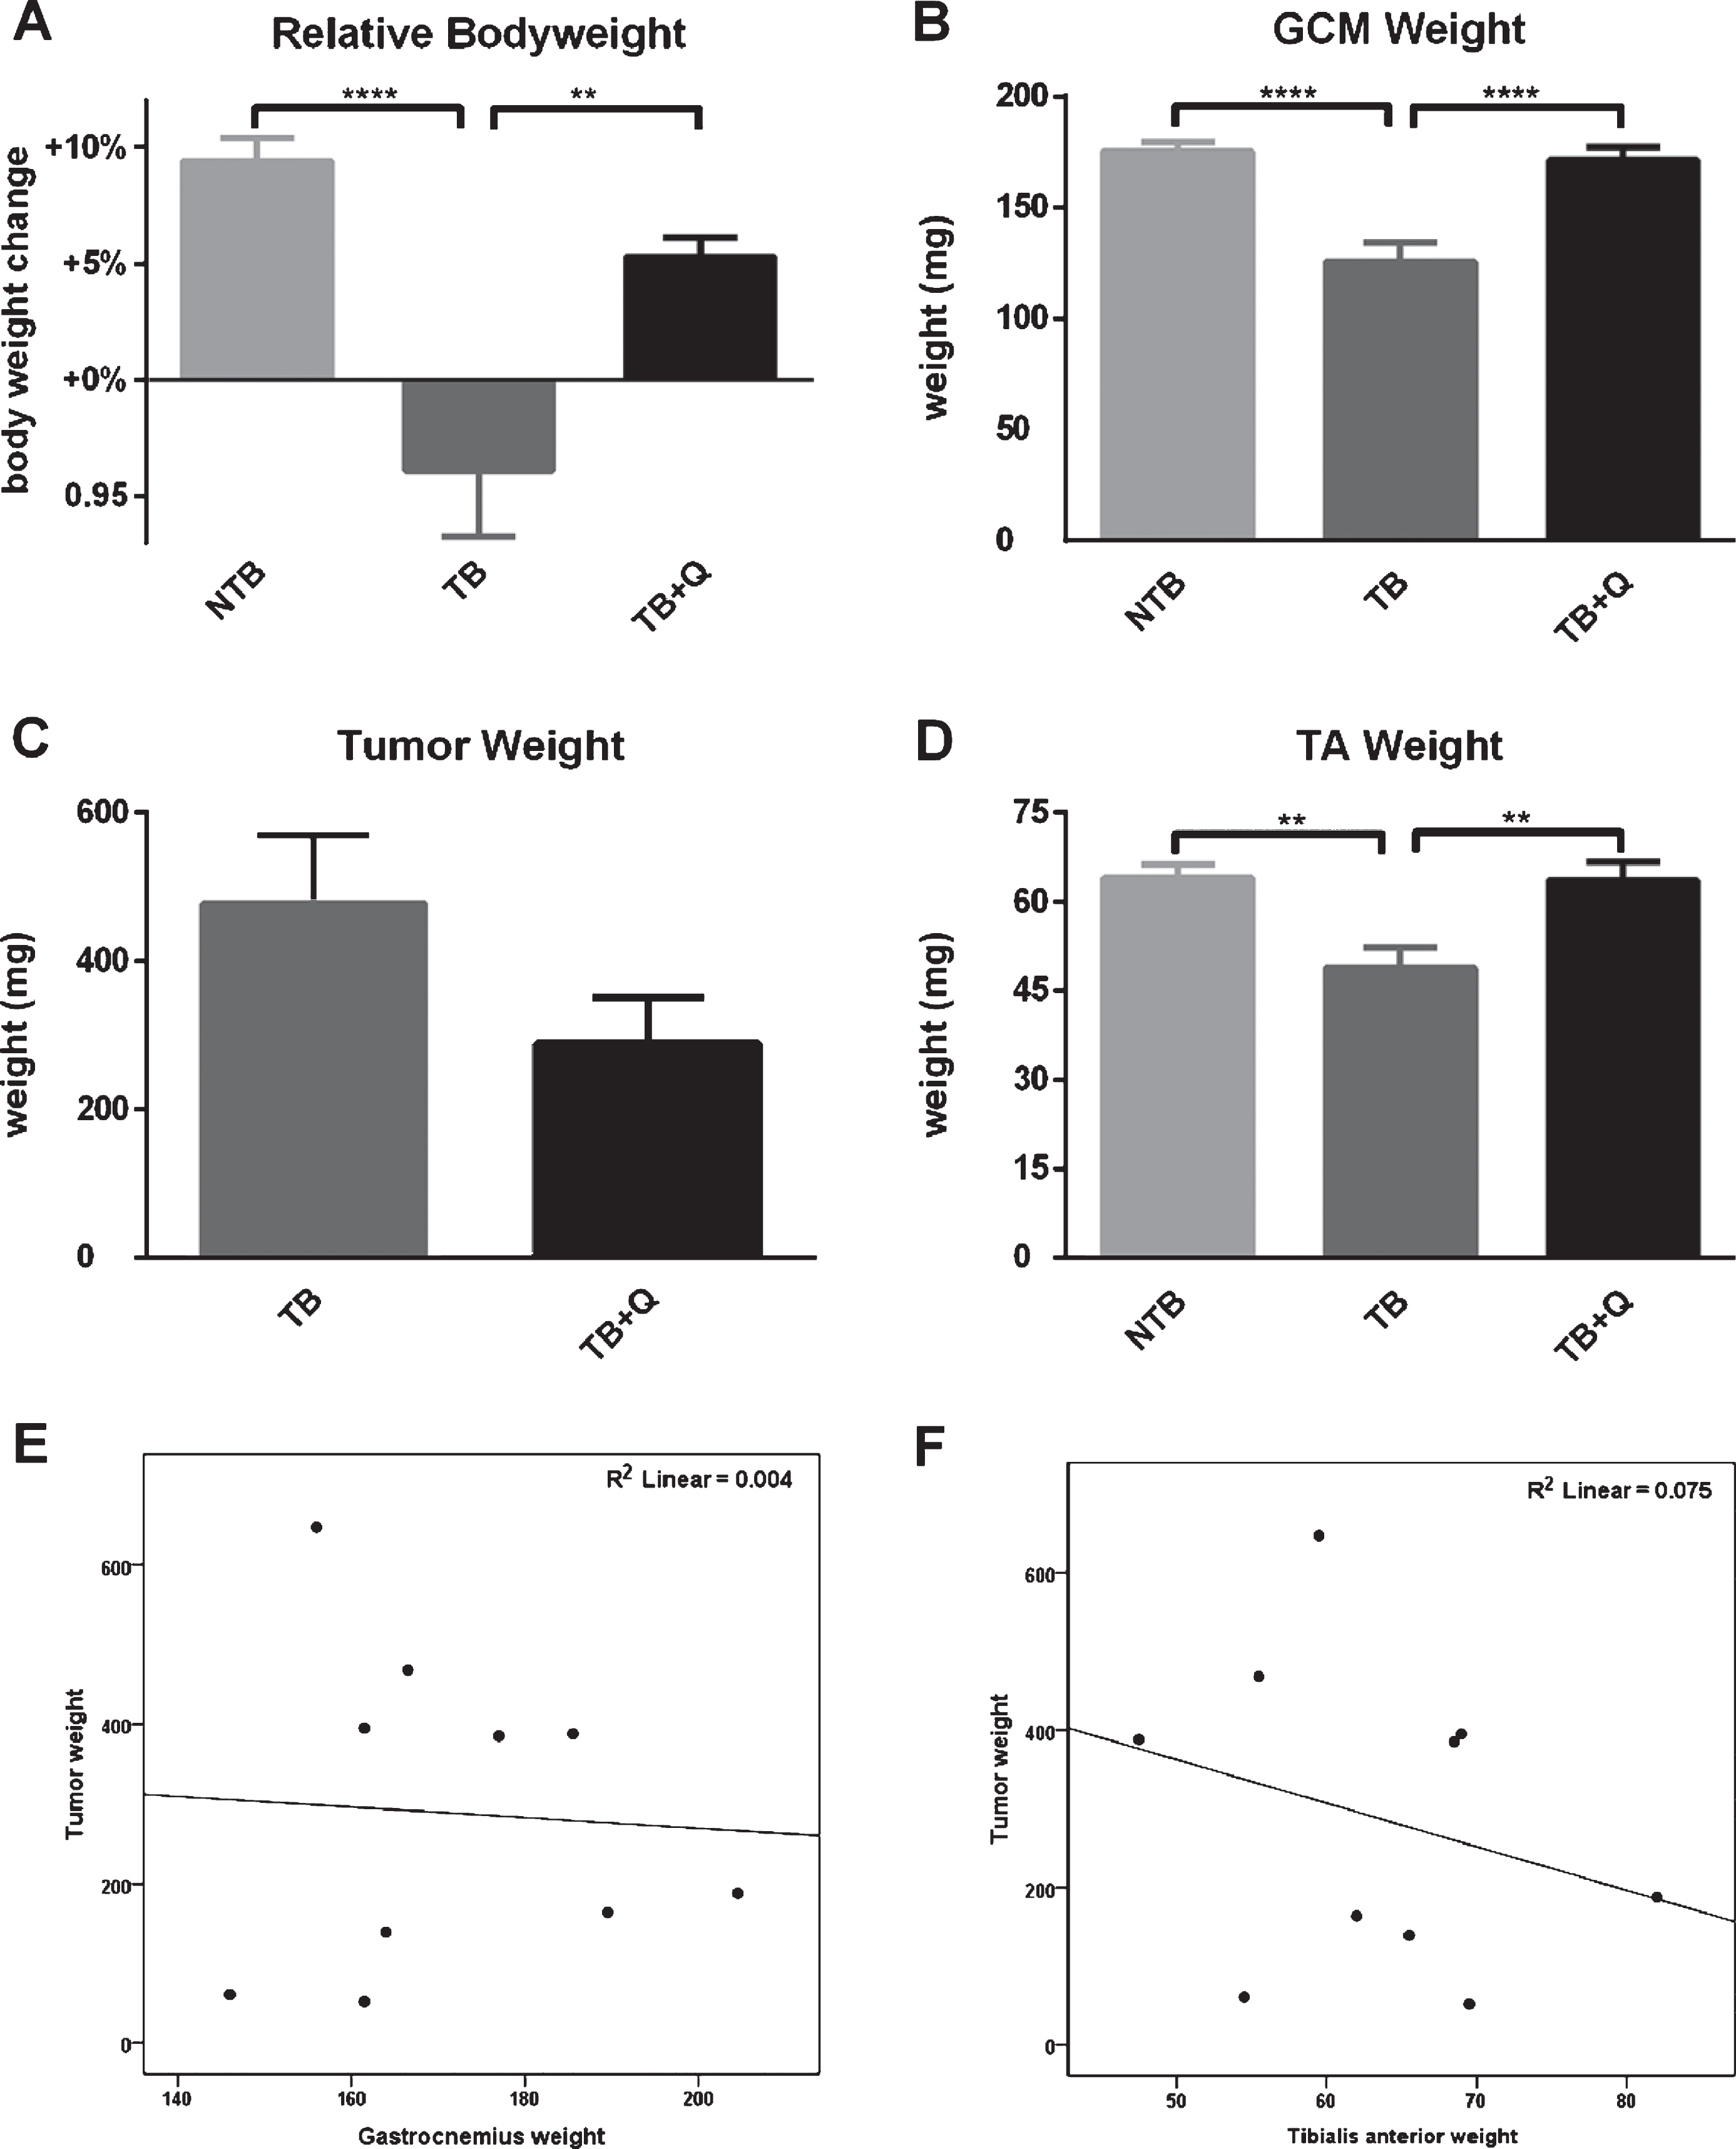 Bodyweight, muscle weight and tumor mass at sacrifice. Bar graphs depicting the mean±SEM for (A) final bodyweight normalized to starting bodyweight, (B) gastrocnemius muscle weight, (C) tumor weight, and (D) tibialis anterior muscle weight in non-tumor-bearing male CD2F1 mice (NTB, n = 10), C26 tumor-bearing (TB) mice with ad libitum access to regular chow (C26 TB, n = 10) and mice with ad libitum access to quercetin supplemented chow (TB+Q, n = 10). Multiple group comparisons were done by one-way ANOVA with a Bonferroni’s posthoc test. All groups were compared against TB mice. Asterisk brackets are displayed for significant results only. ** p < 0.01 **** p < 0.0001. A possible tumor weight reduction in quercetin treated mice was noted, therefore the relationship between gastrocnemius muscle weight and tumor weight, as well as tibialis anterior muscle weight and tumor weight, were assessed to demonstrate that a possible reduction in tumor burden did not contribute to the attenuation in muscle atrophy. Scatter-dot plots depict no relationship between (E) gastrocnemius muscle mass and tumor mass (Spearman’s rho = 0.091, p = 0.80) and (F) tibialis anterior muscle mass and tumor mass (Spearman’s rho=–0.261, p = 0.47) in quercetin-treated mice. Considering these statistics, the attenuation in muscle atrophy cannot be sufficiently explained by differences in tumor burden.